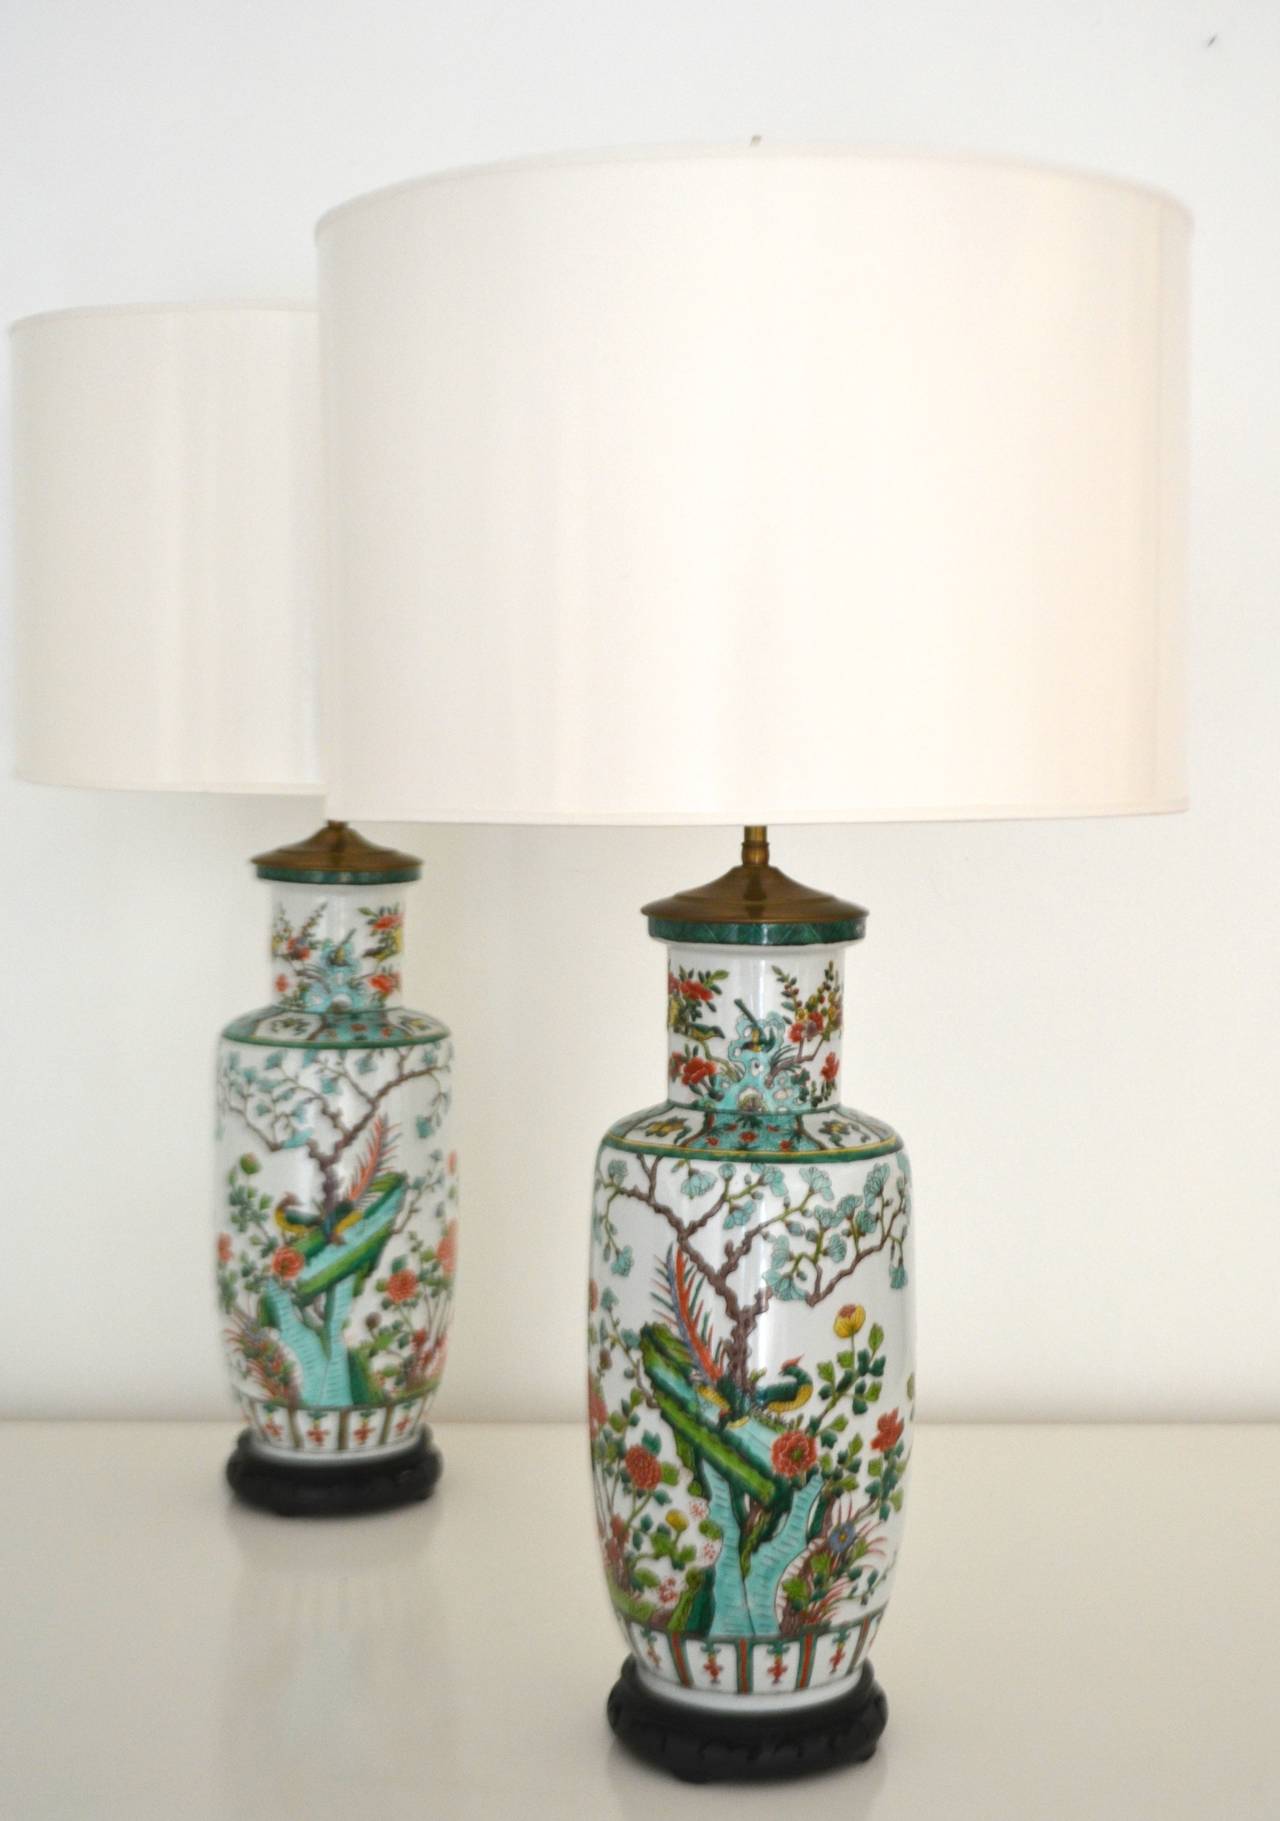 Stunning pair of porcelain Chinoiserie vase form polychrome table lamps, c.1940s - 1950s. These highly decorative Chinese lamps are mounted on carved wooden bases and wired with brass double cluster adjustable fittings.
Shades not